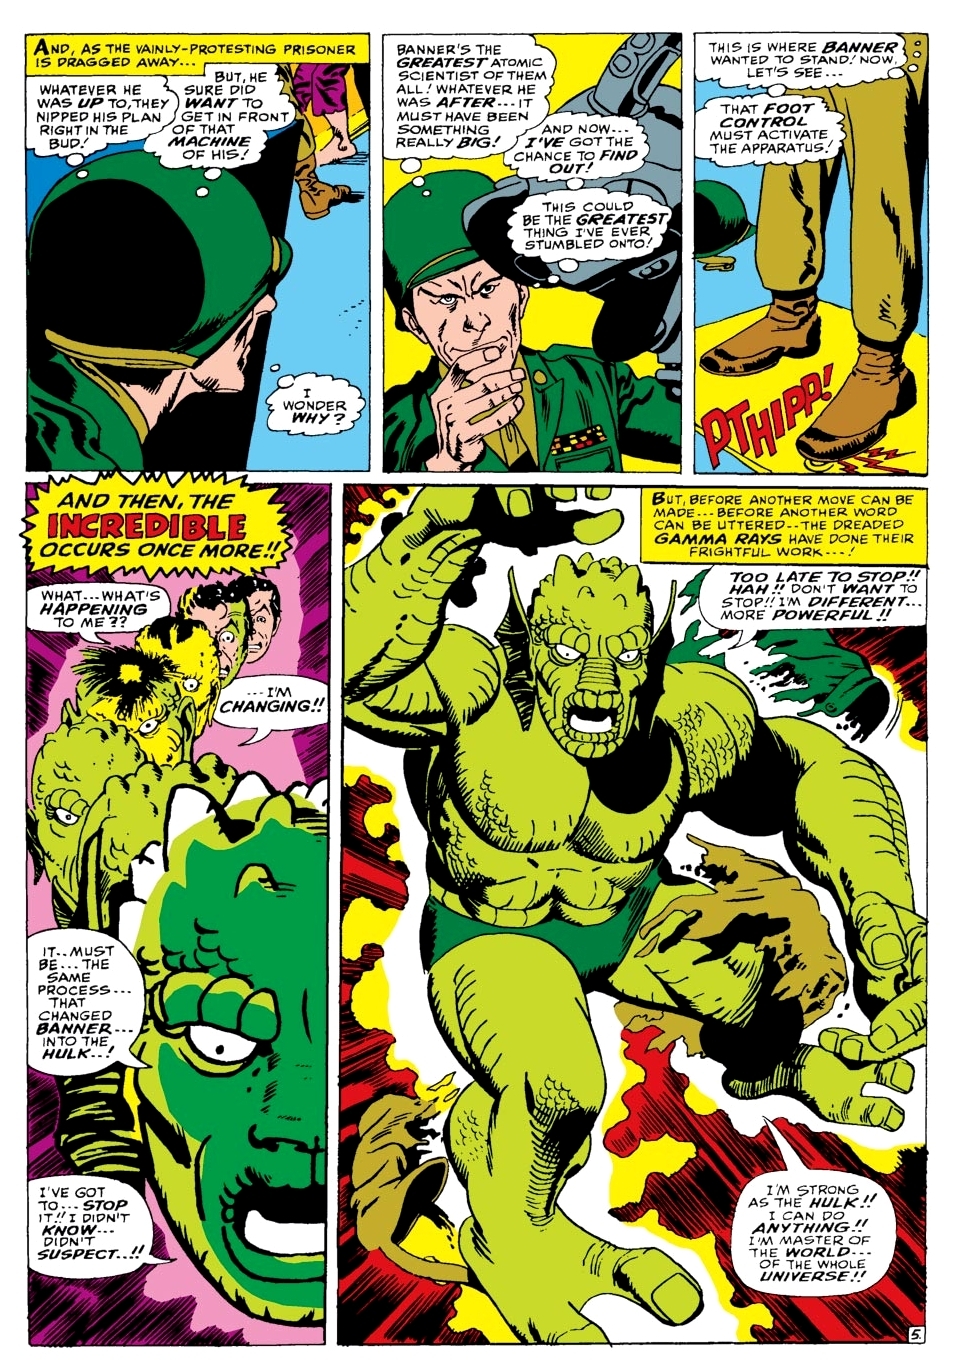 Tales to Astonish #90 story page 5 (1st Abomination), in Ted Latner's Hulk  Smash! Comic Art Gallery Room